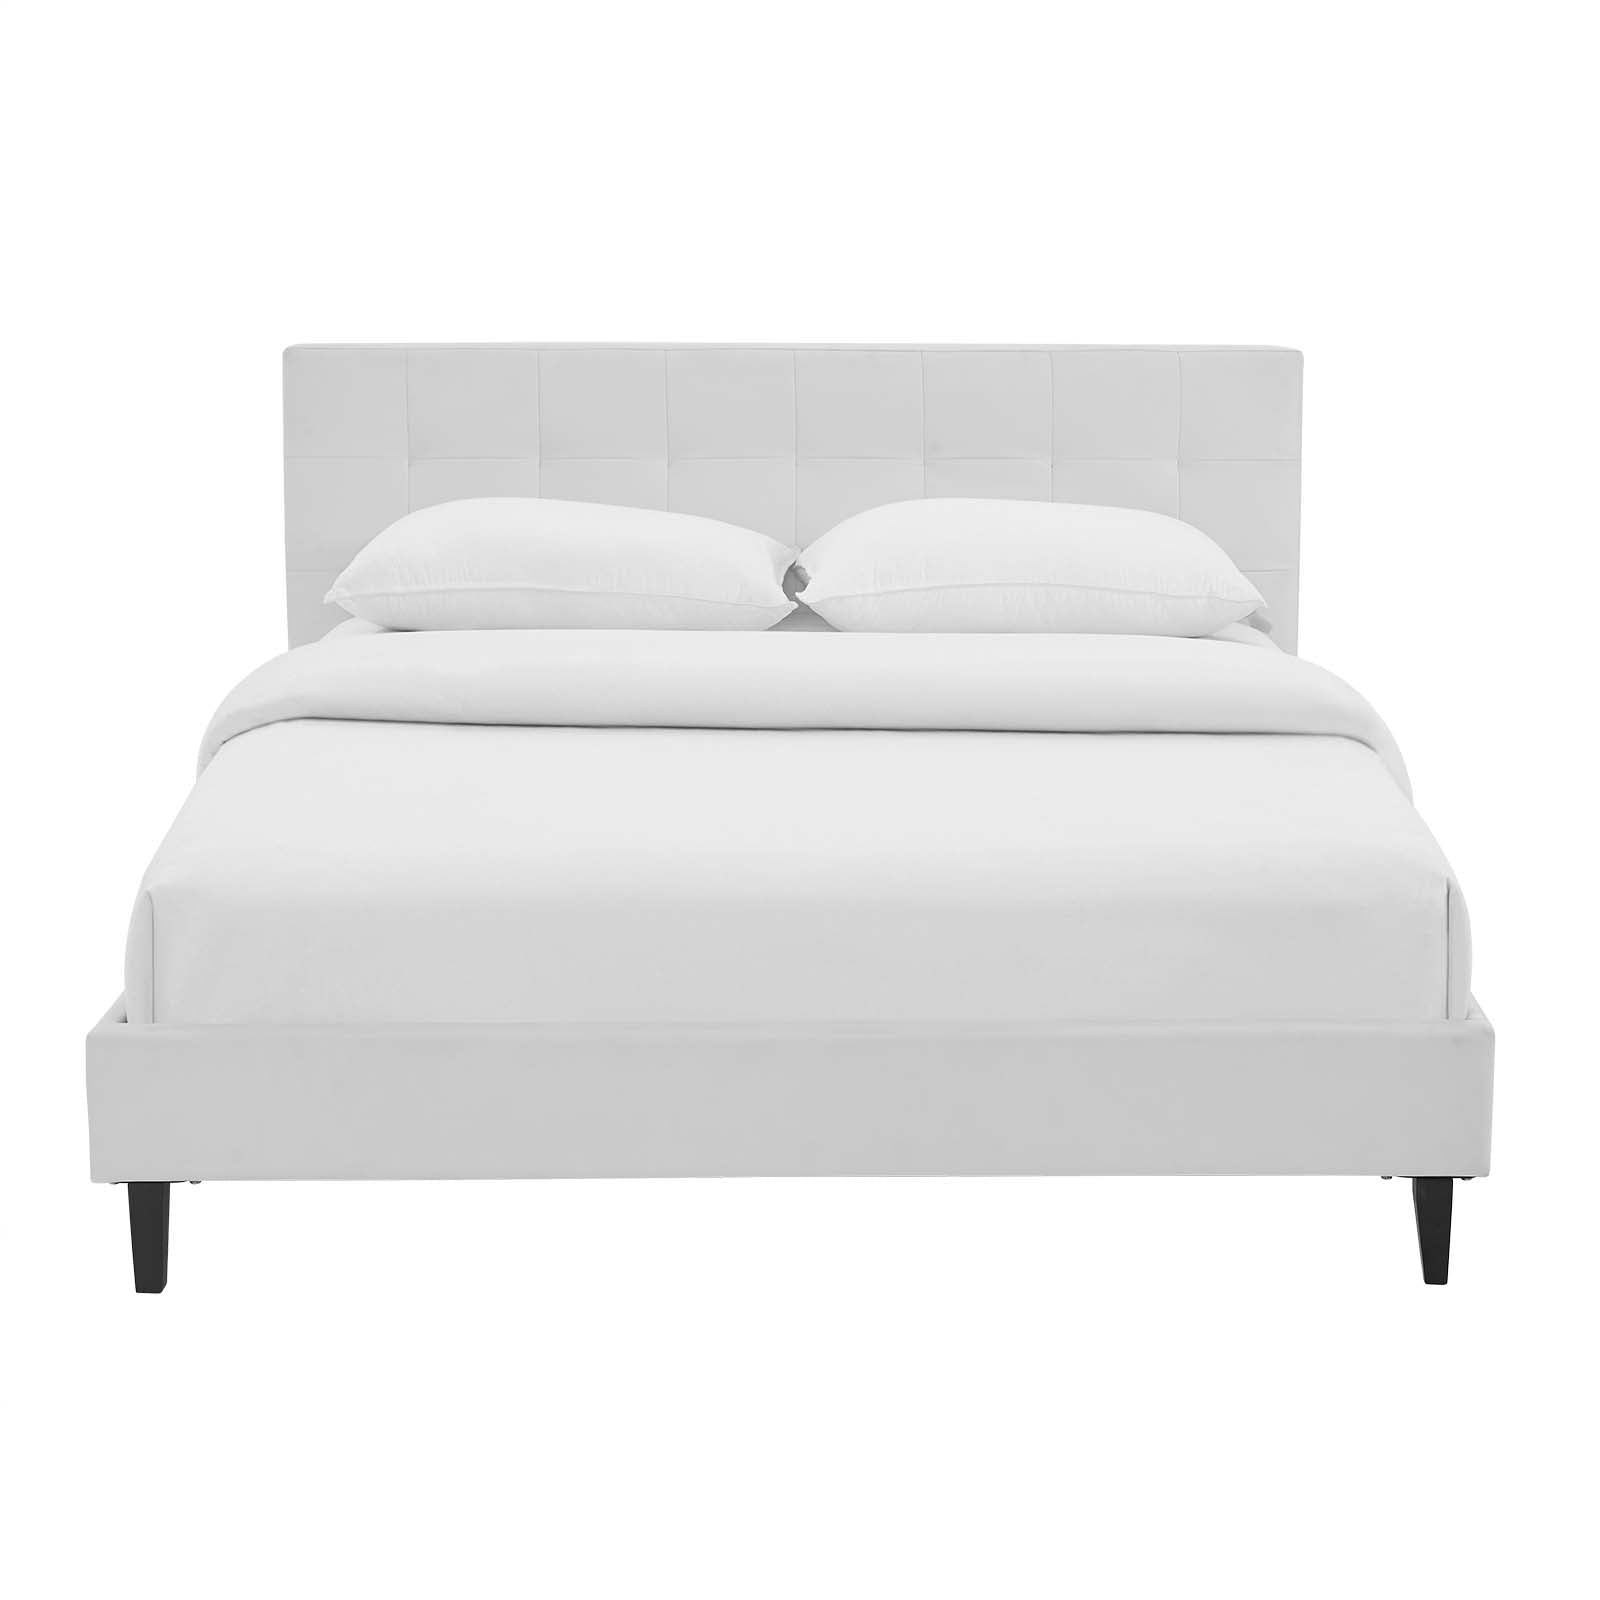 Modway Beds - Linnea Full Faux Leather Bed White